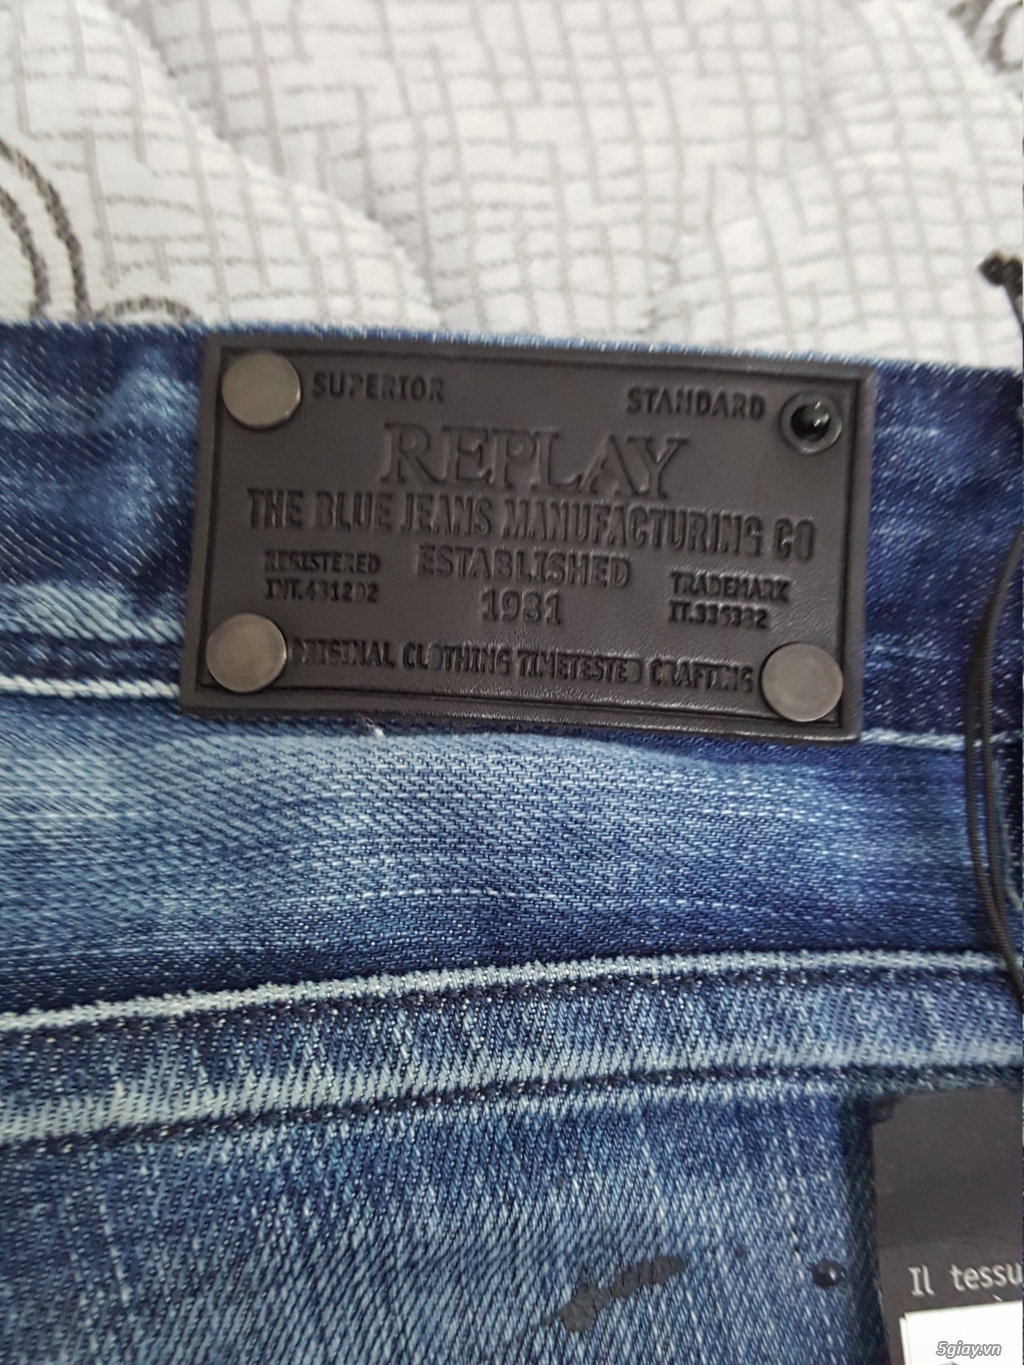 Jeans REPLAY Lonham size 31 - New full tags ! - 4